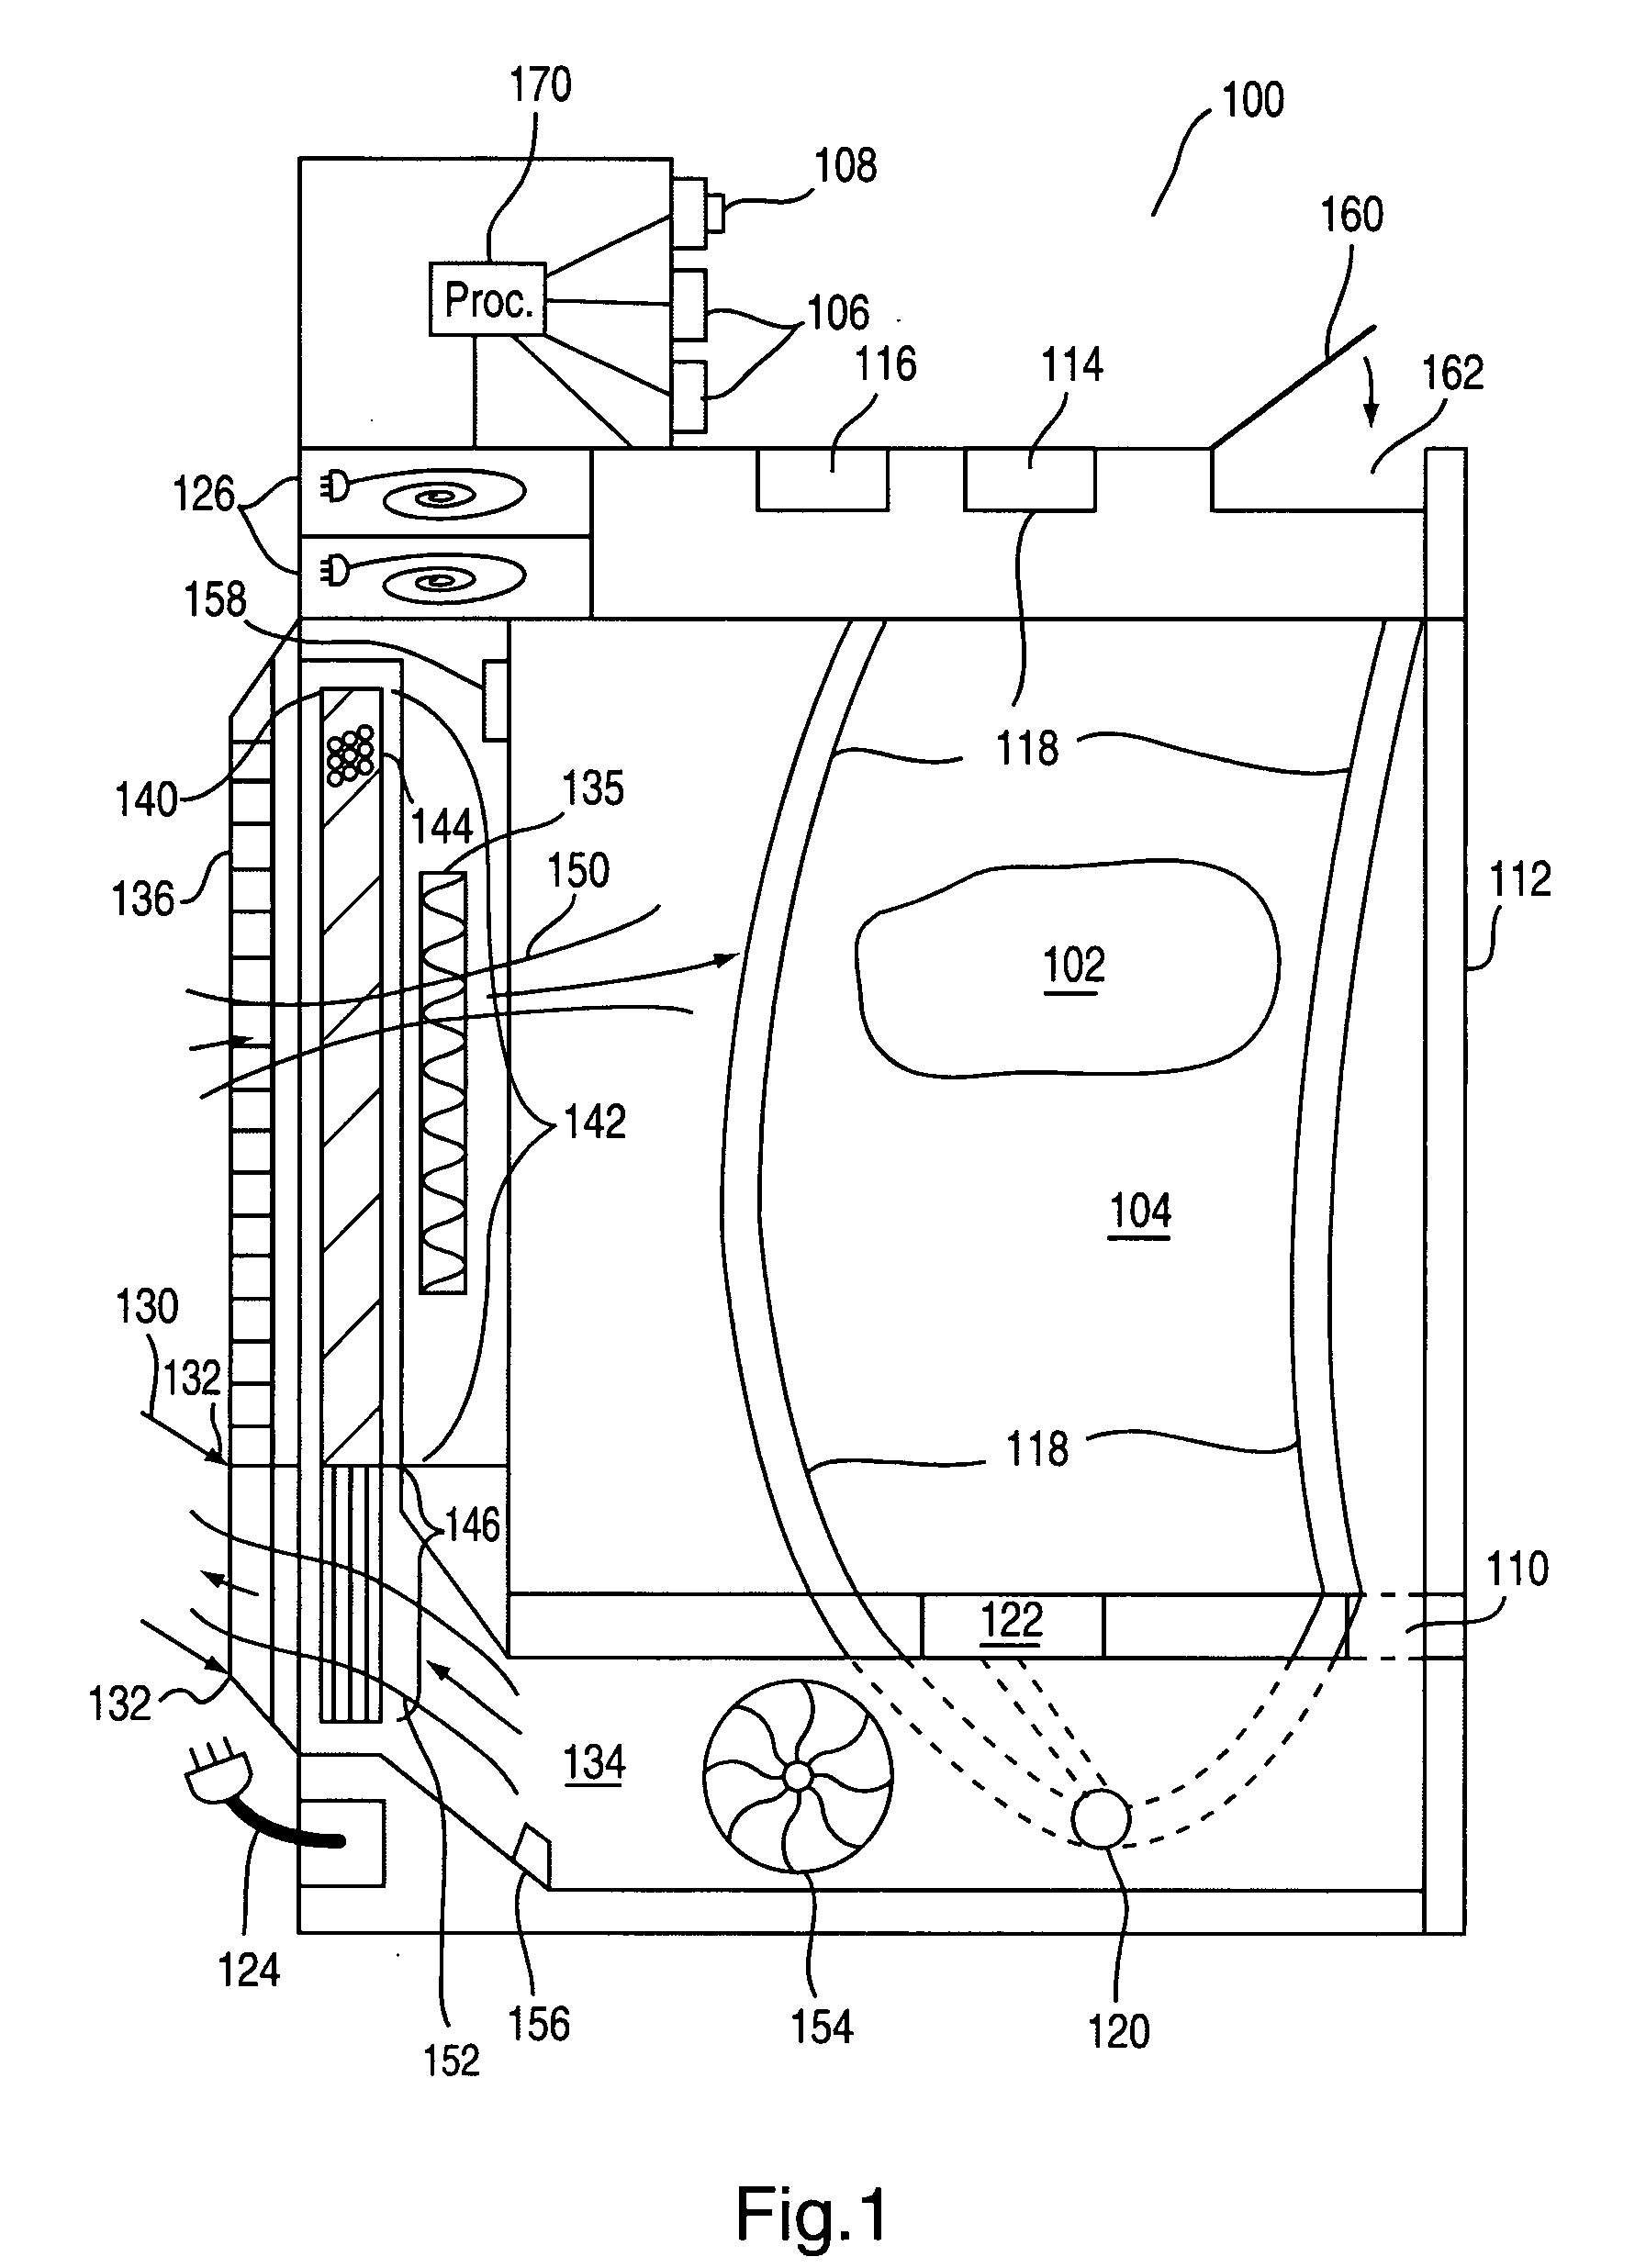 Dryer and drying apparatus with enhanced moisture removal